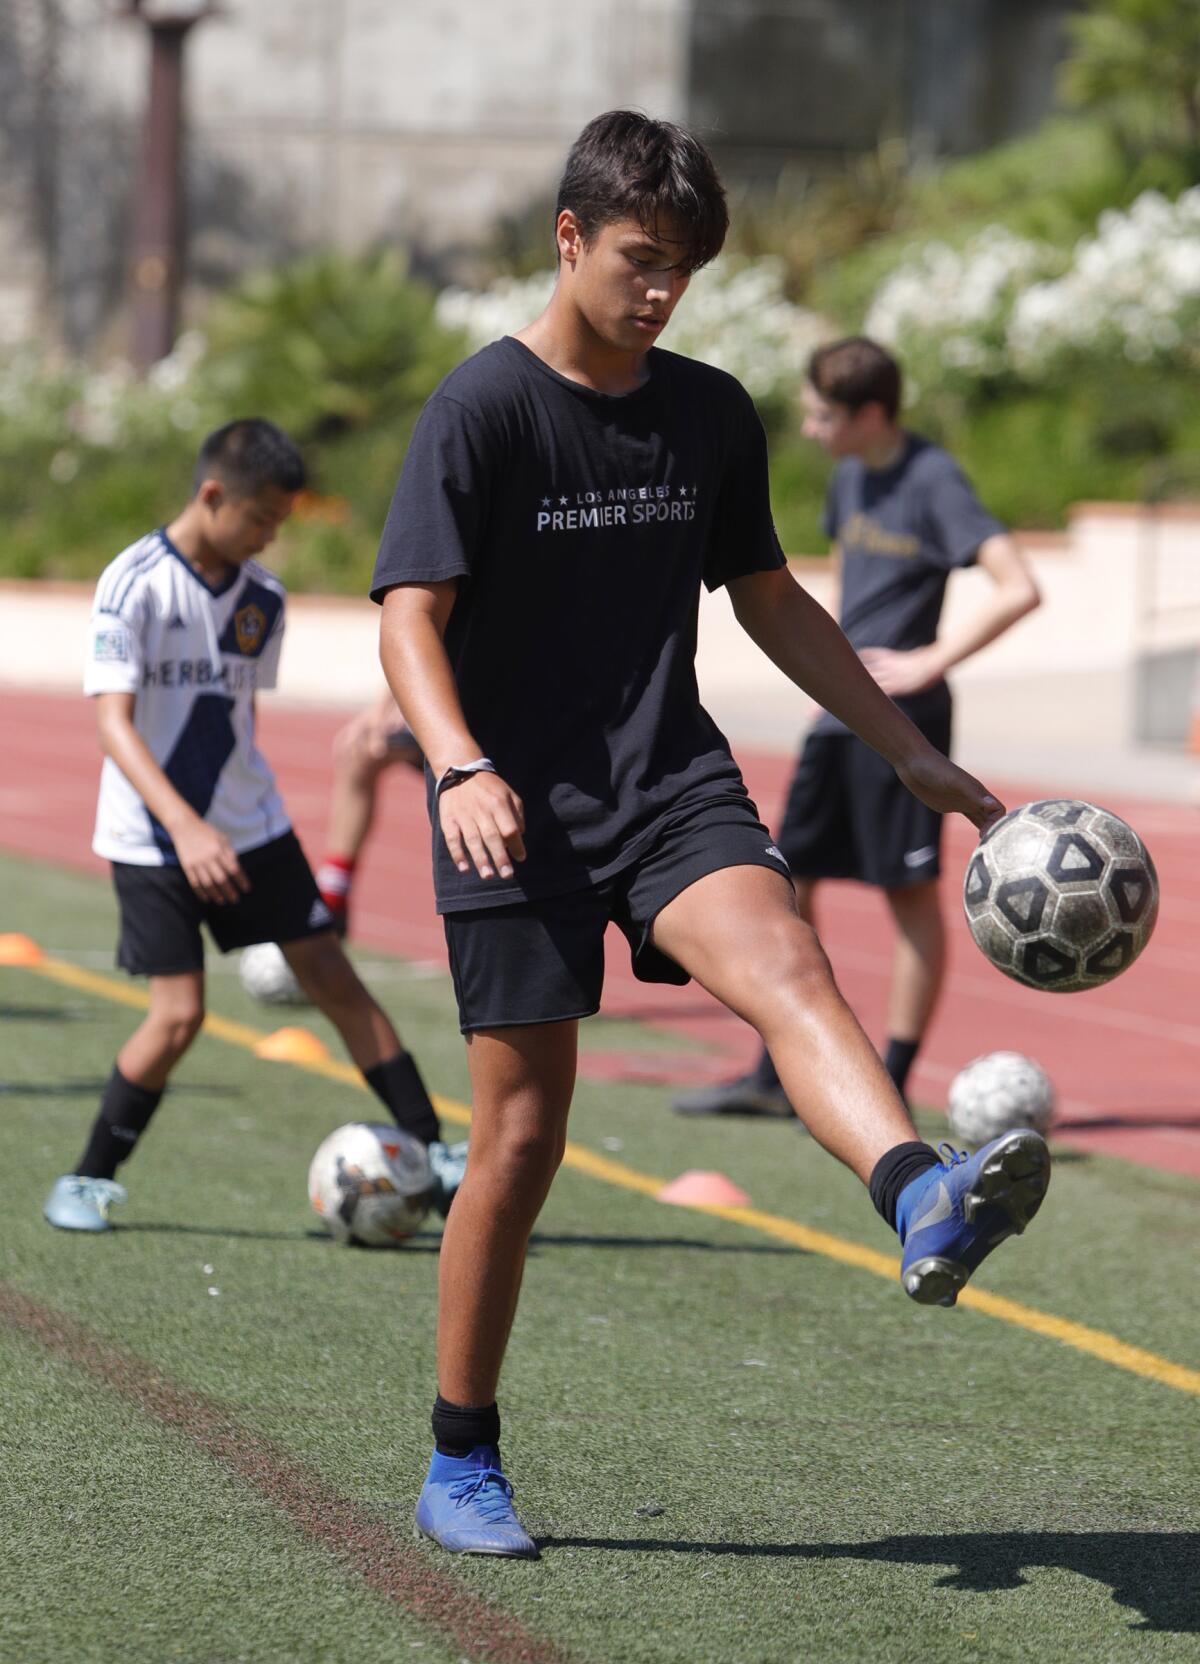 Camper Matthew Murillo, 13, of San Gabriel, juggles the ball in a 1-minute juggling contest that he scored 86 juggles at the St. Francis Summer Soccer Camp led by St. Francis Coach Glen Appels at St. Francis High School on Monday, July 29, 2019. The camp encourages boys and girls from six to eighteen to learn soccer skills in shooting, dribbling, passing, and ball control through drills and video.